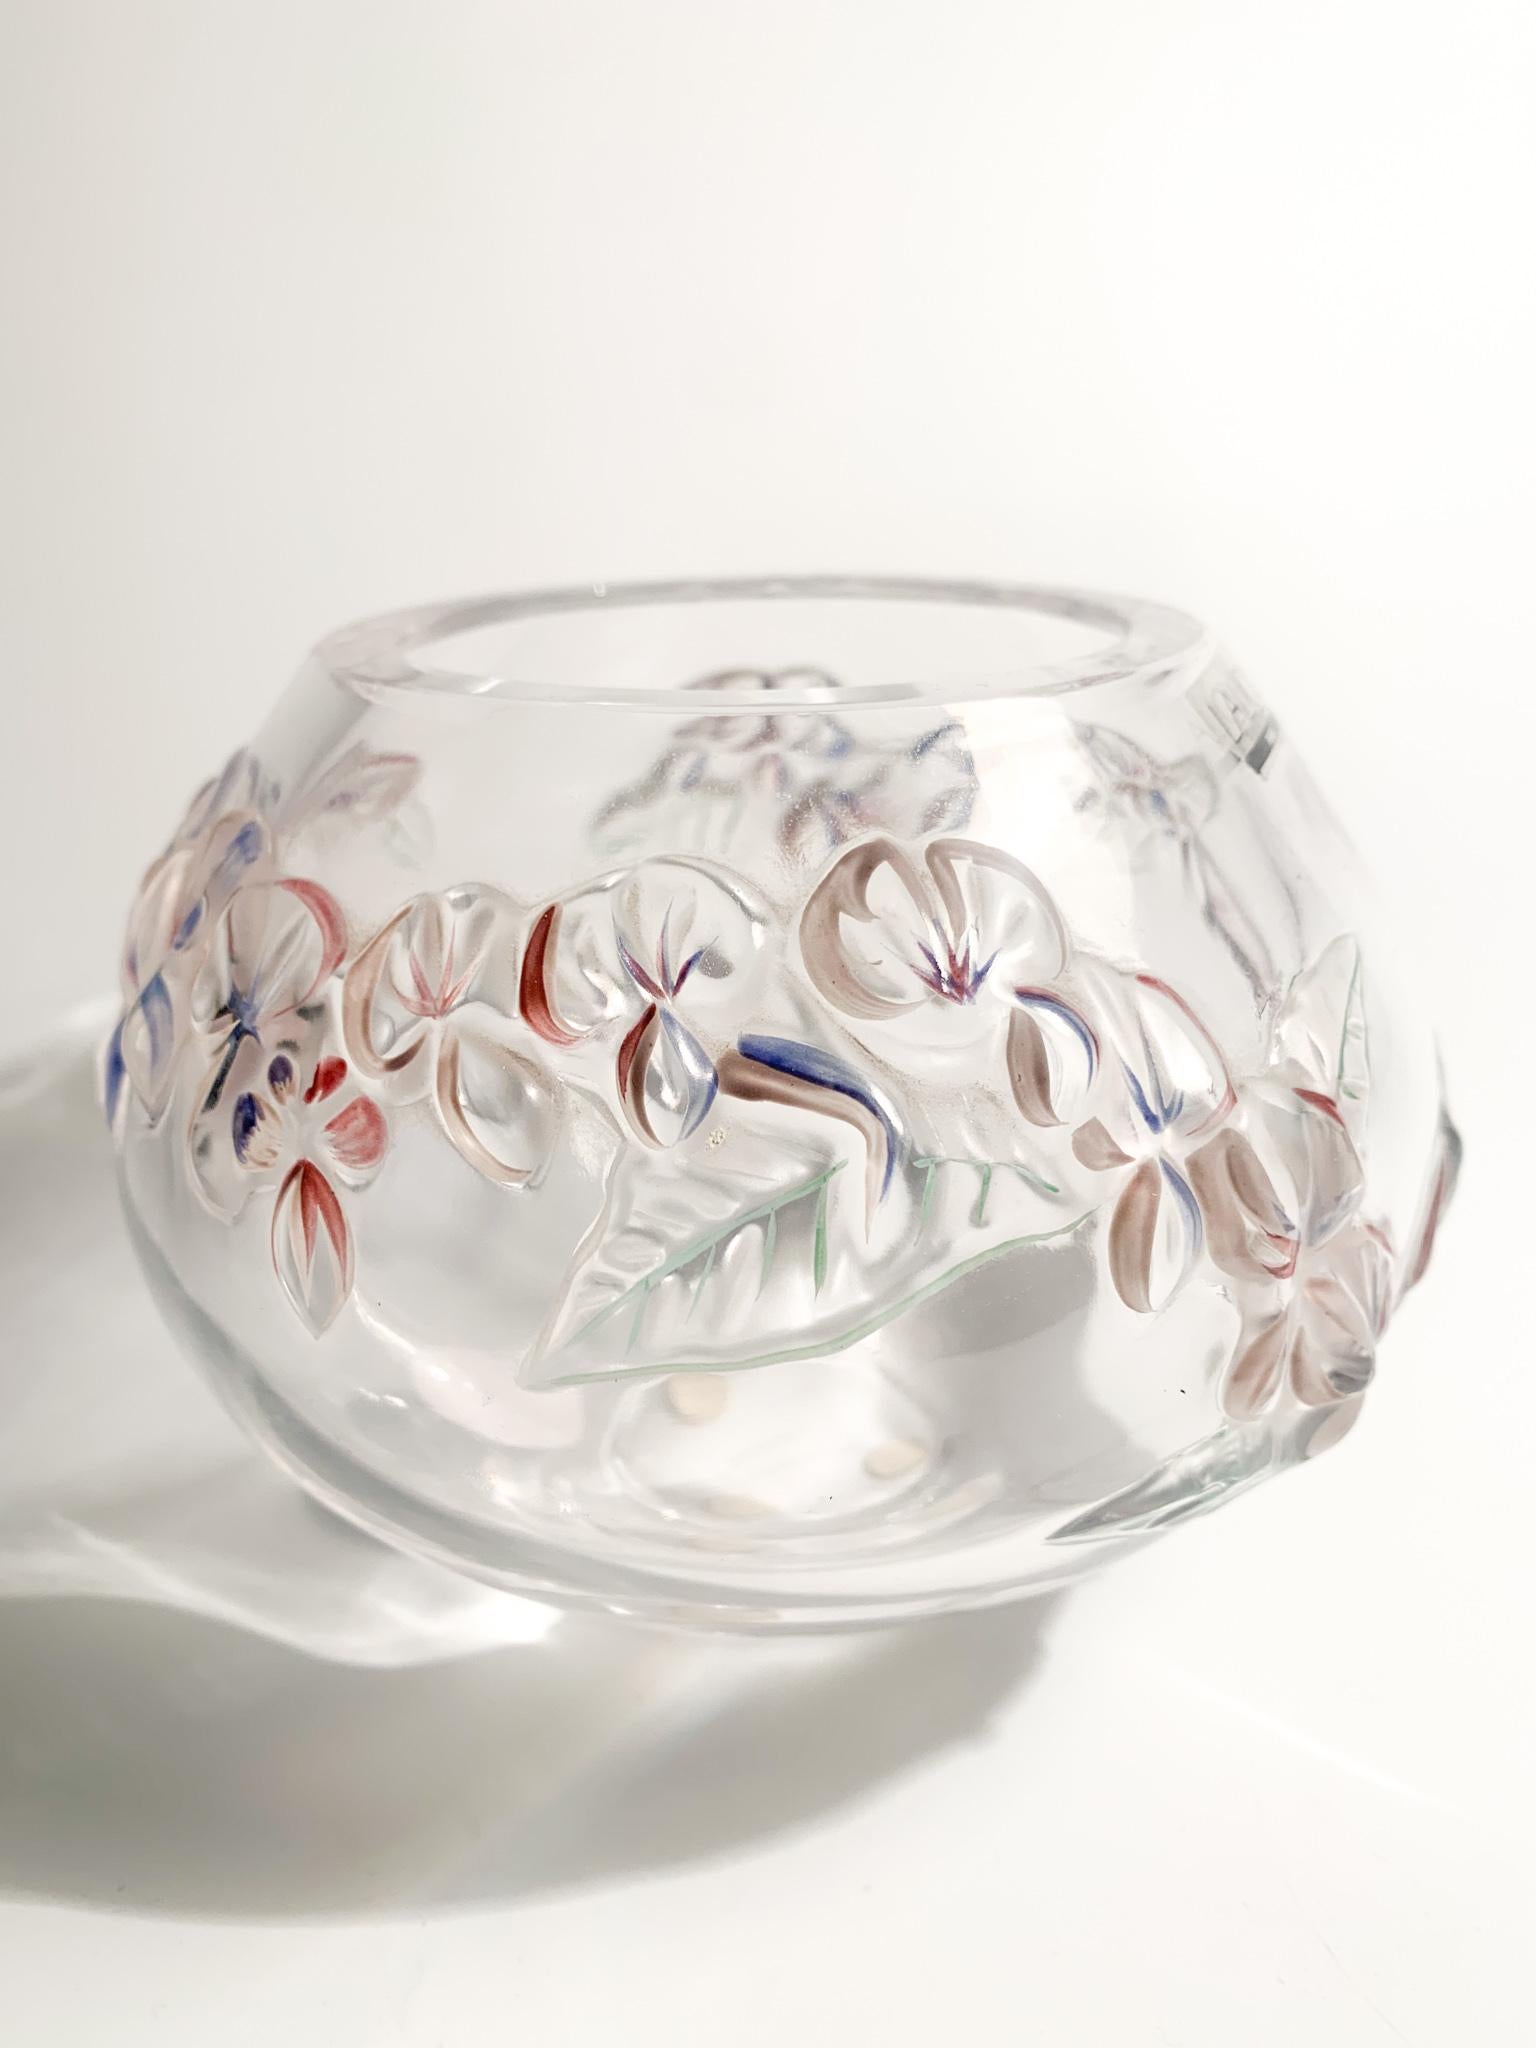 Art Nouveau Lalique Crystal Vase with Colored Flowers from the, 50s